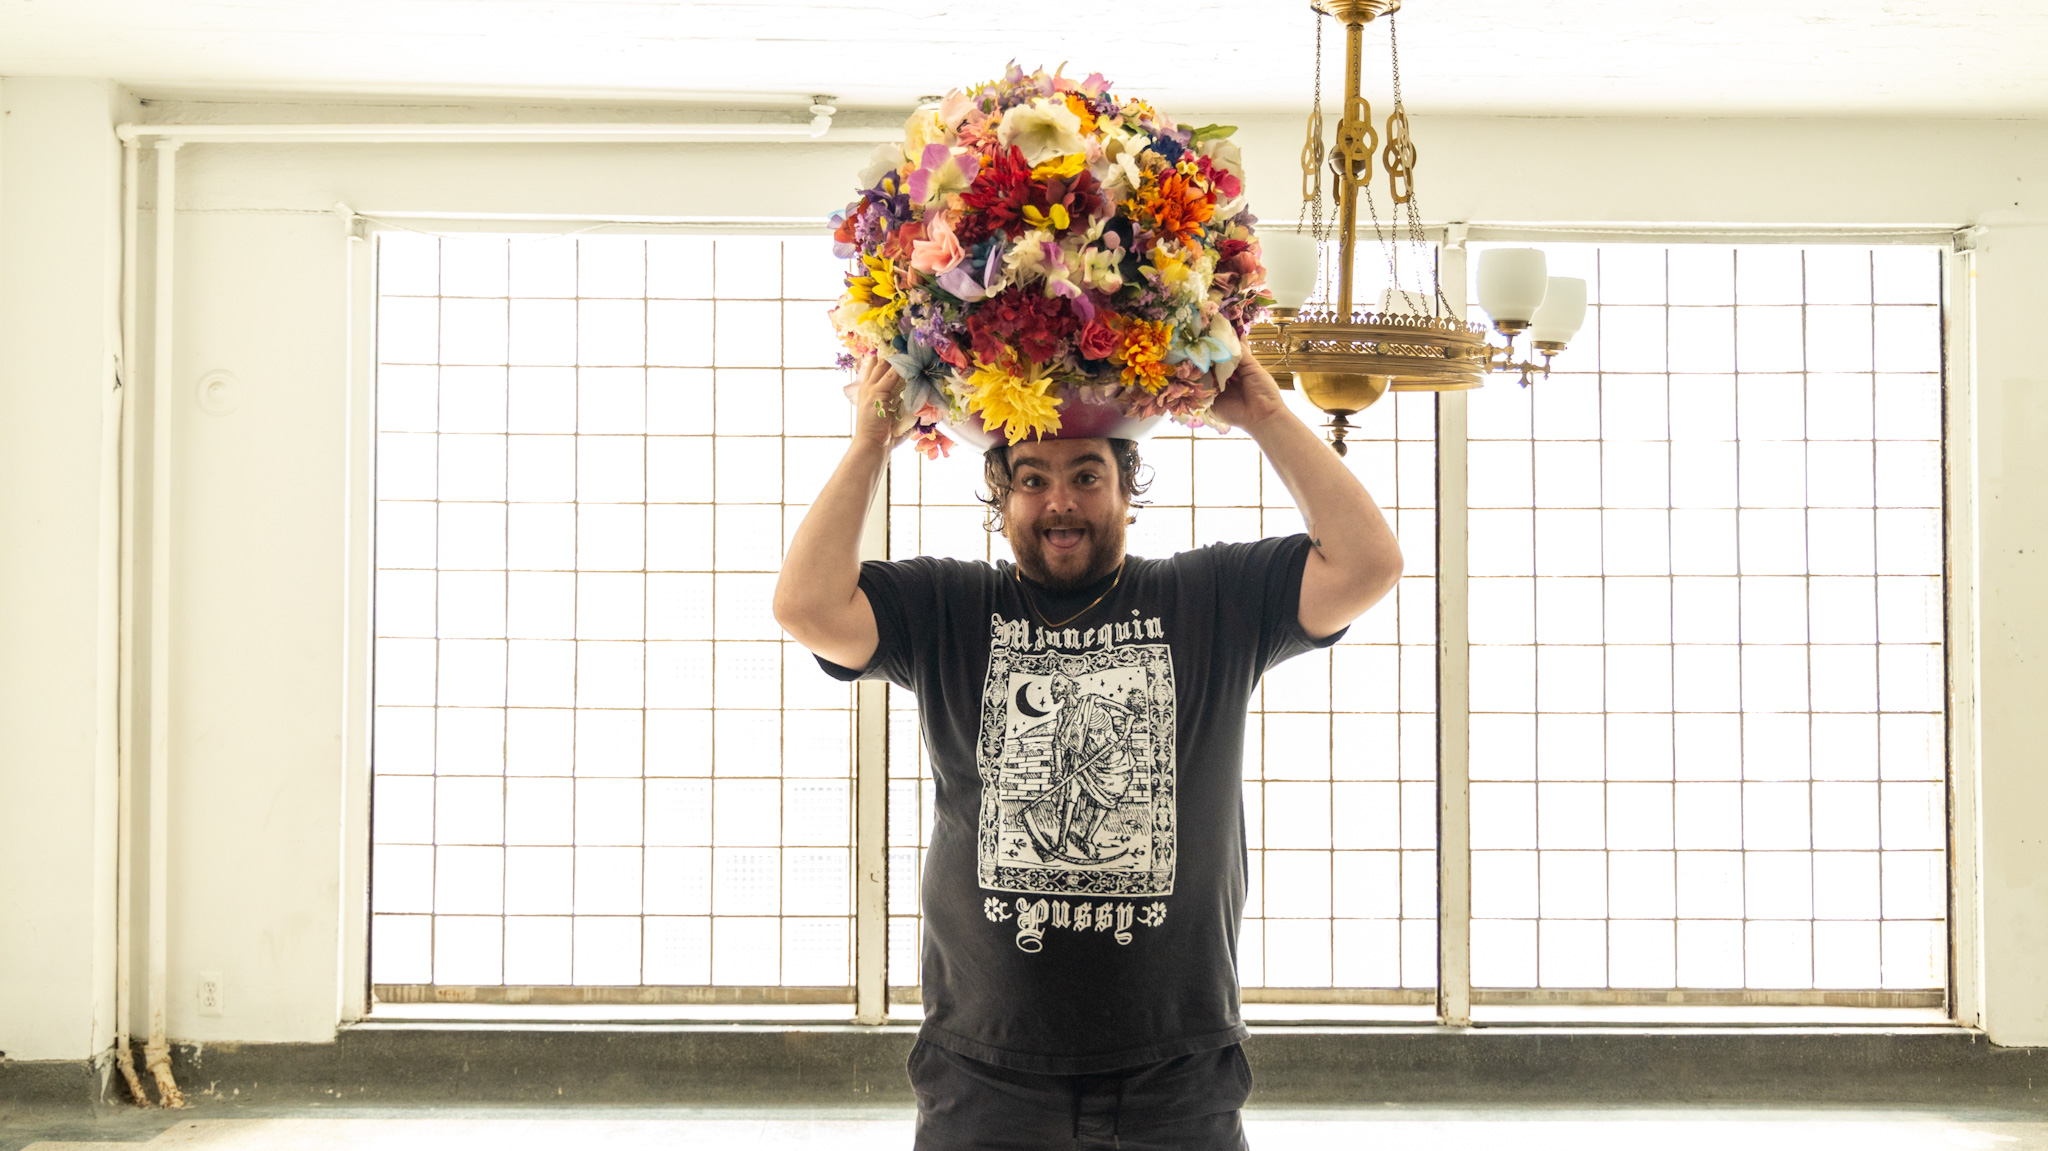 WDET host Ryan Patrick Hooper holding a flower headdress created by artist Lisa Waud at her "Portrait" art installation at the Boyer Campbell building in Detroit on June 26, 2024. (Photo by Tayler Simpson, WDET)